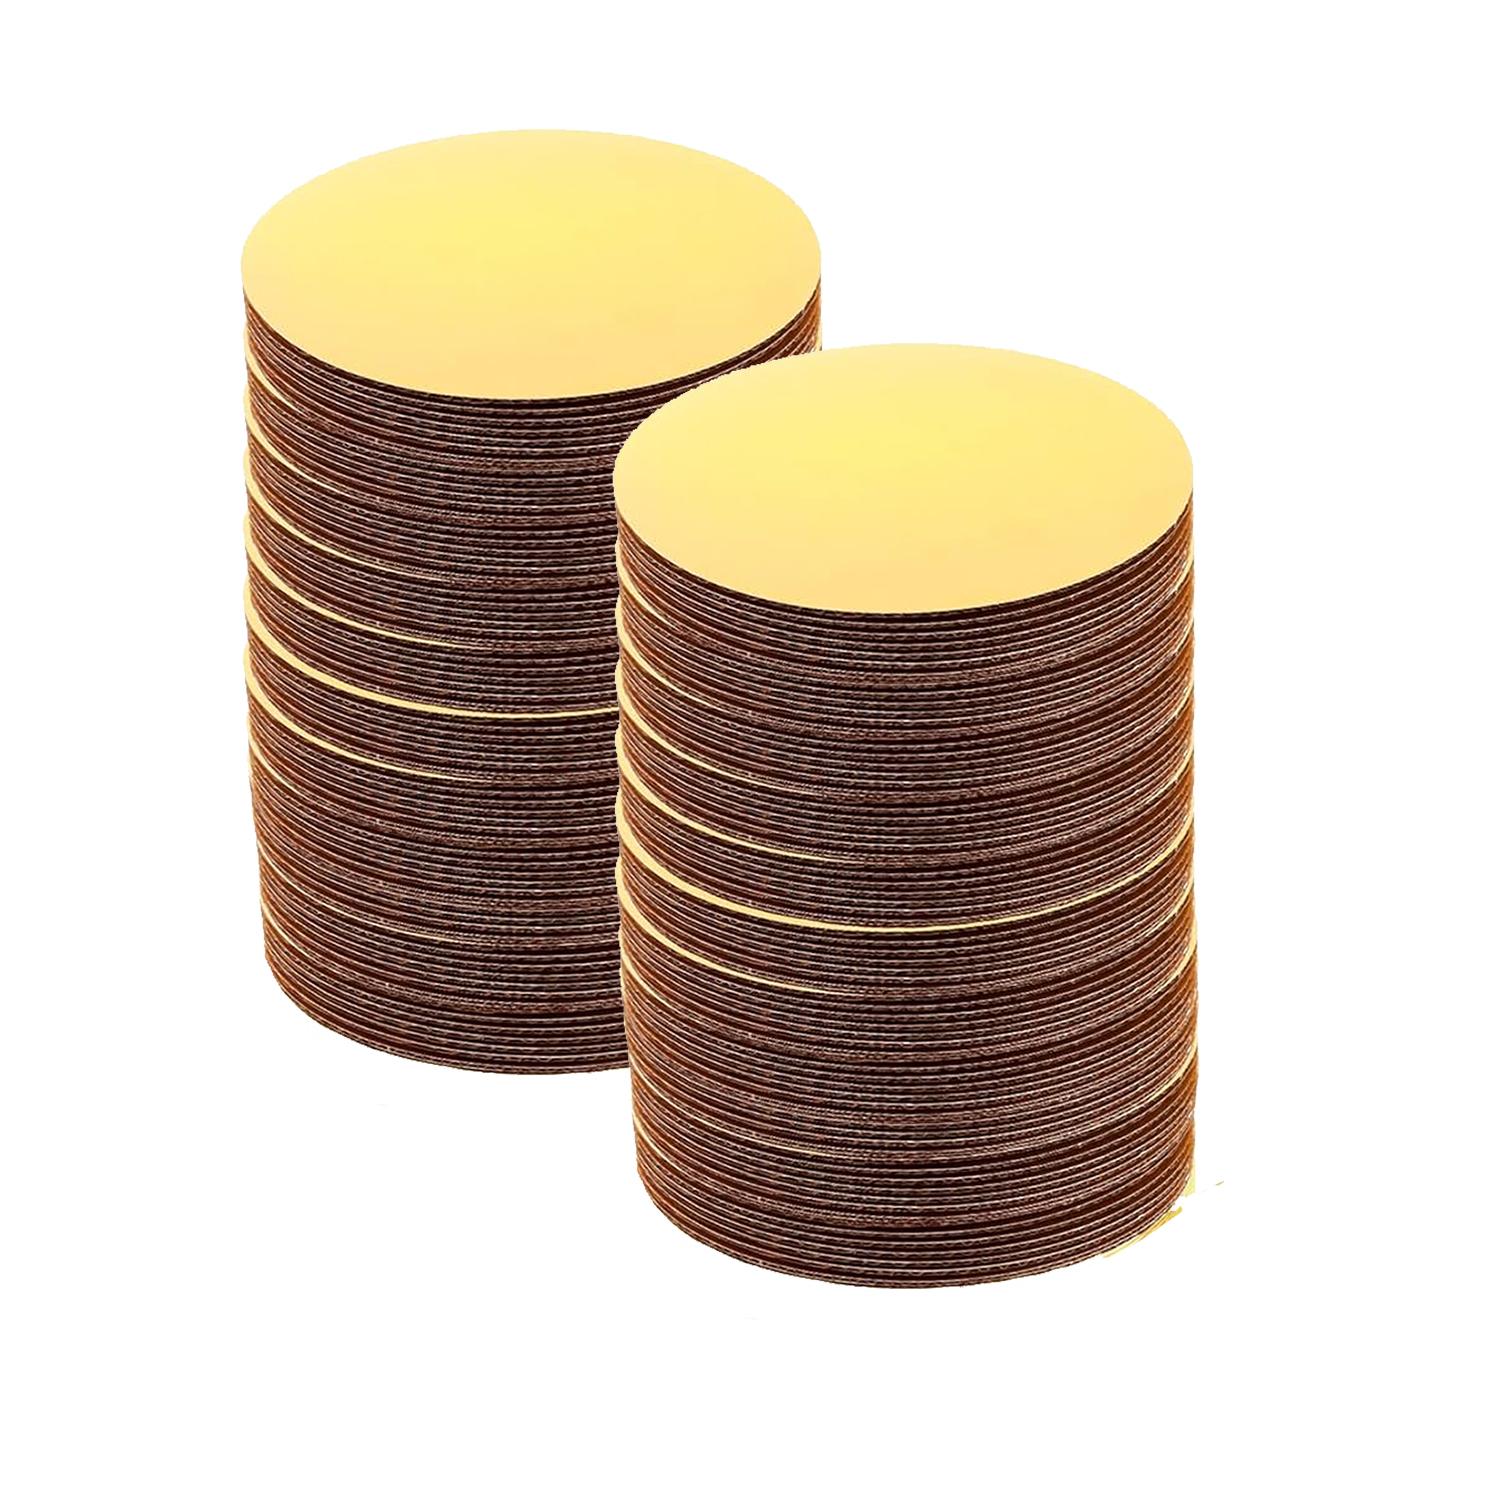 PACK OF 100 - 10'' ROUND SMOOTH GOLD CAKE BOARD